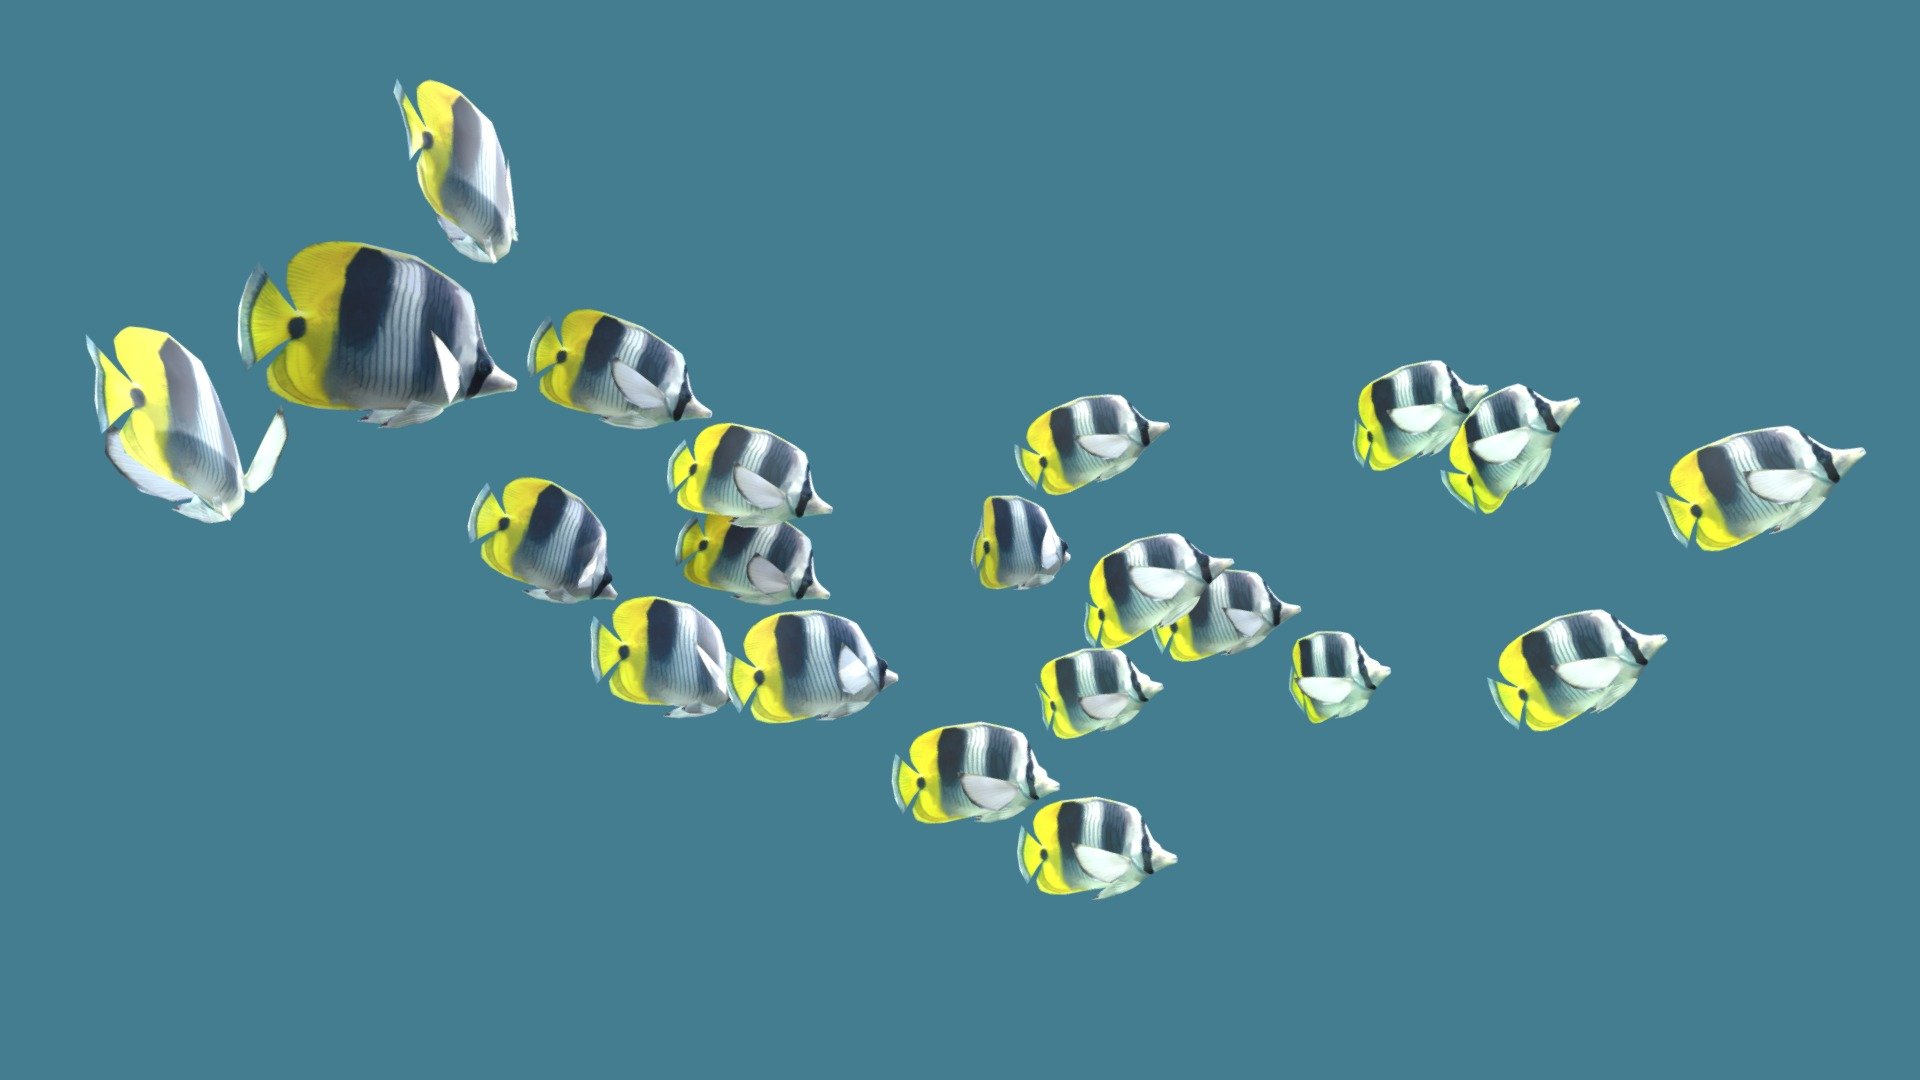 Schooling of Double-Saddle Coral fish animated in a loop.


The school of fish contains 21 fish. The fish created in Maya. All Fish Animated in the loop duration 30 sec.


All fish don't cross each other



Blue and Yellow fish: https://skfb.ly/6UUZo



Separately fish: 

Blue Fish : https://skfb.ly/6UUYX

Yellow Fish:  https://skfb.ly/6UIBZ



Schooling Fish in cycle: https://skfb.ly/6Tyr6 - Schooling Double Saddle Fish - Buy Royalty Free 3D model by CGSoul 3d model